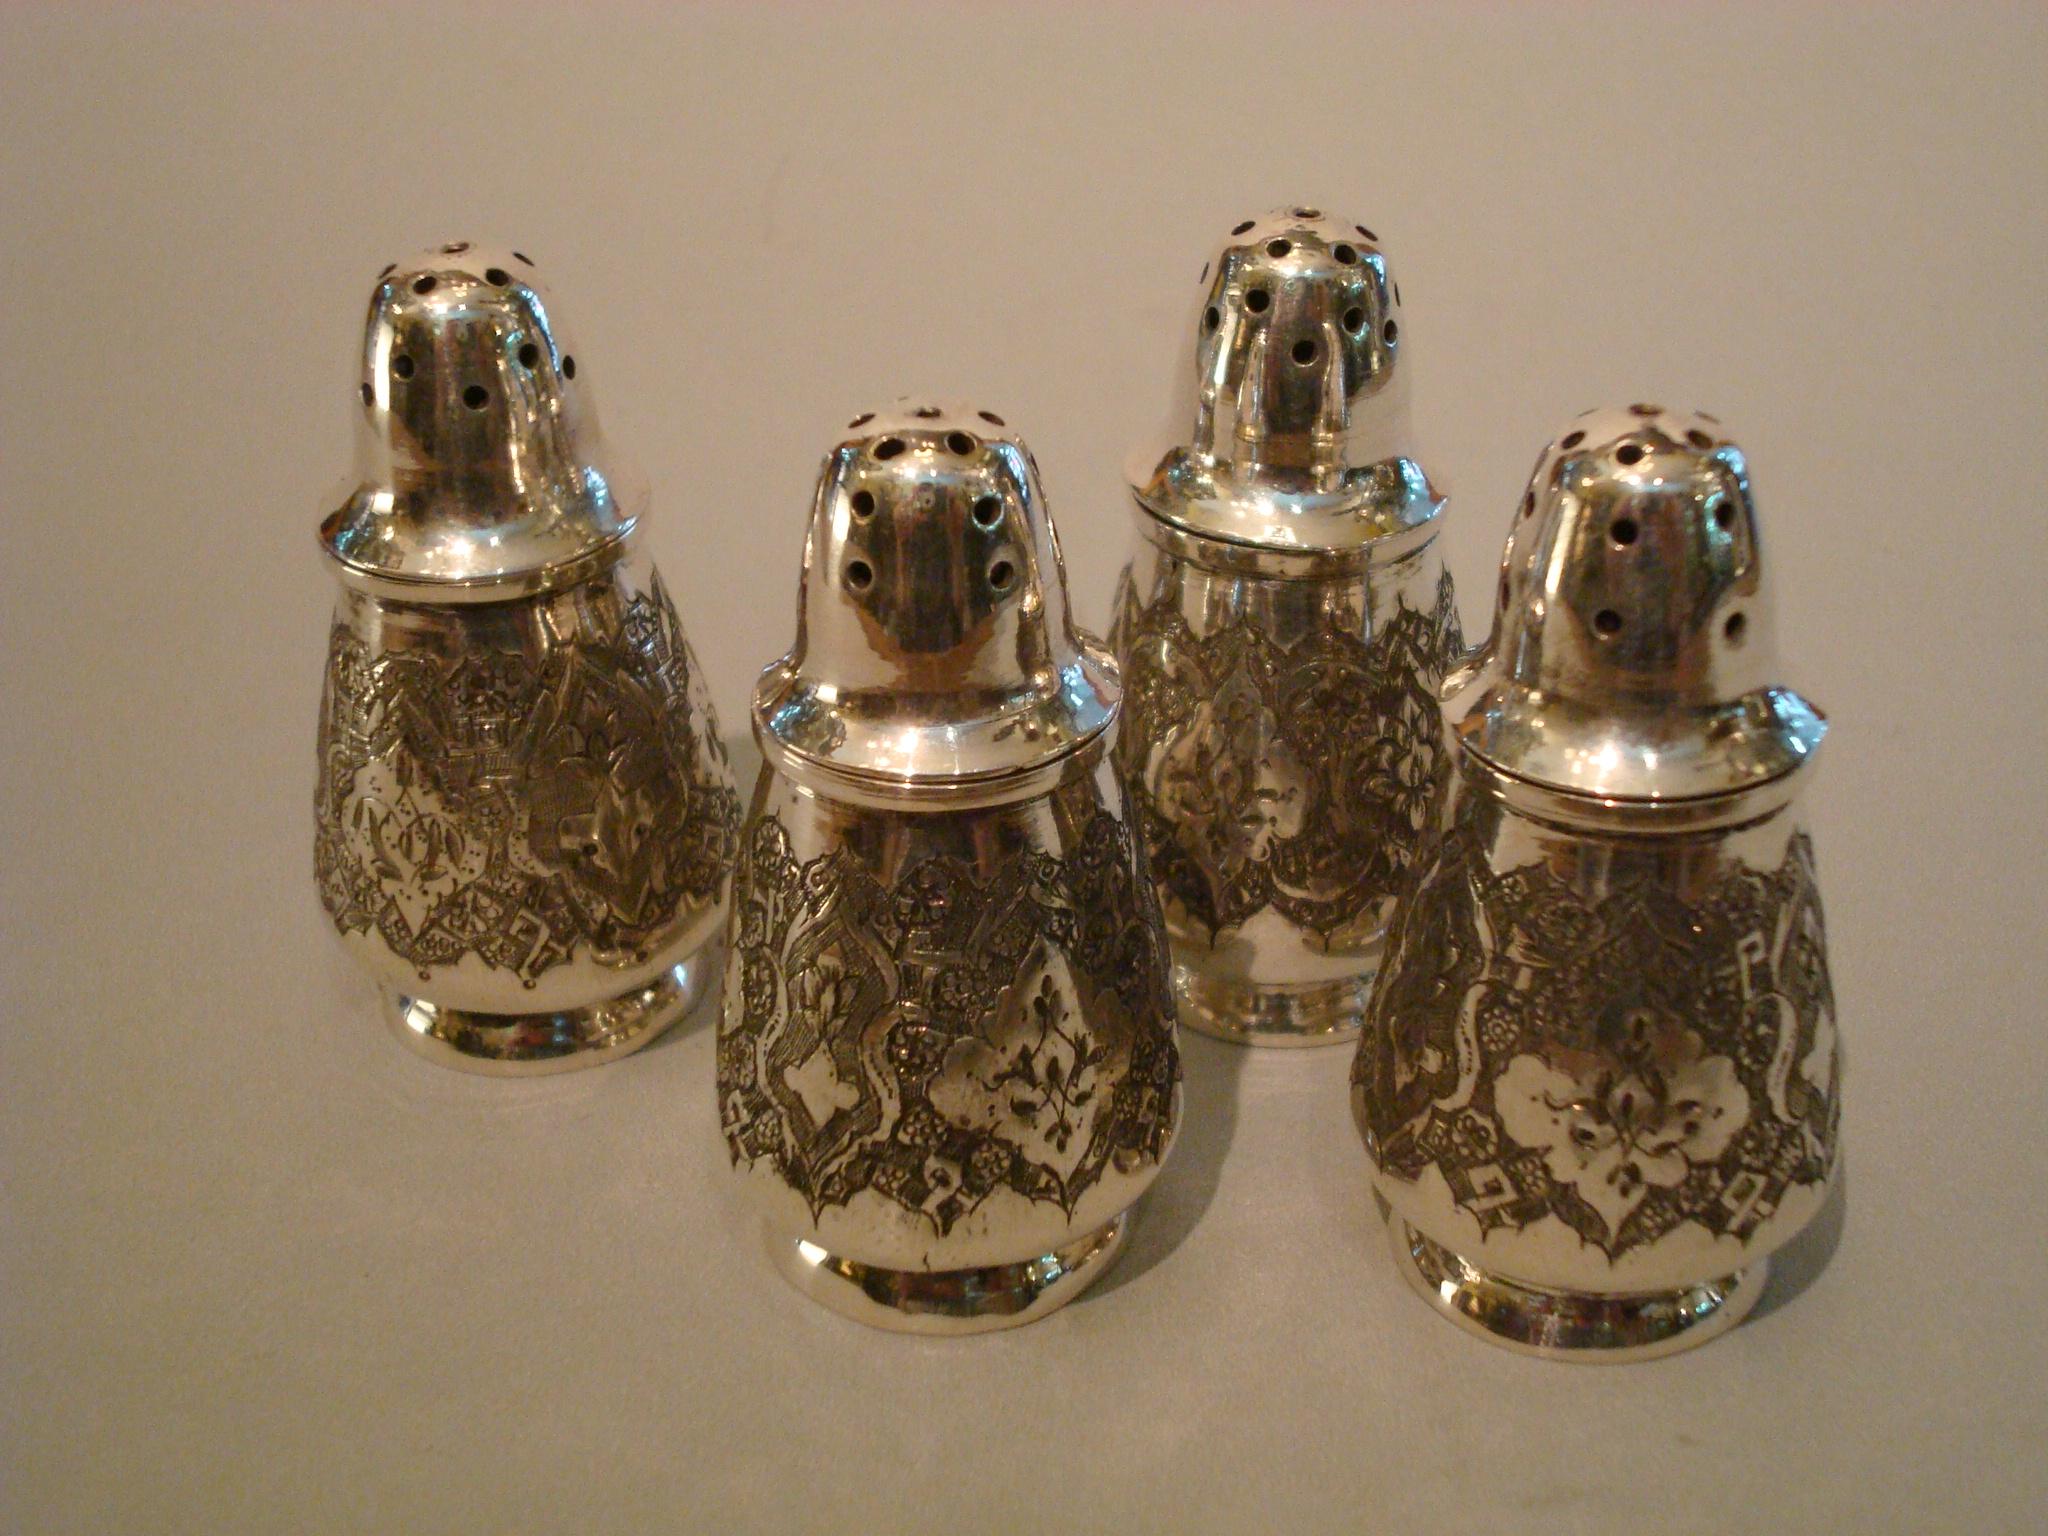 Antique sterling silver salt and pepper shakers.
A set of four engraved Russian/Persian silver salt and pepper shakers.
Made late 19th-early 20th century. Highly decorated with floral motif. Every piece marked 84 (old silver standard) with the